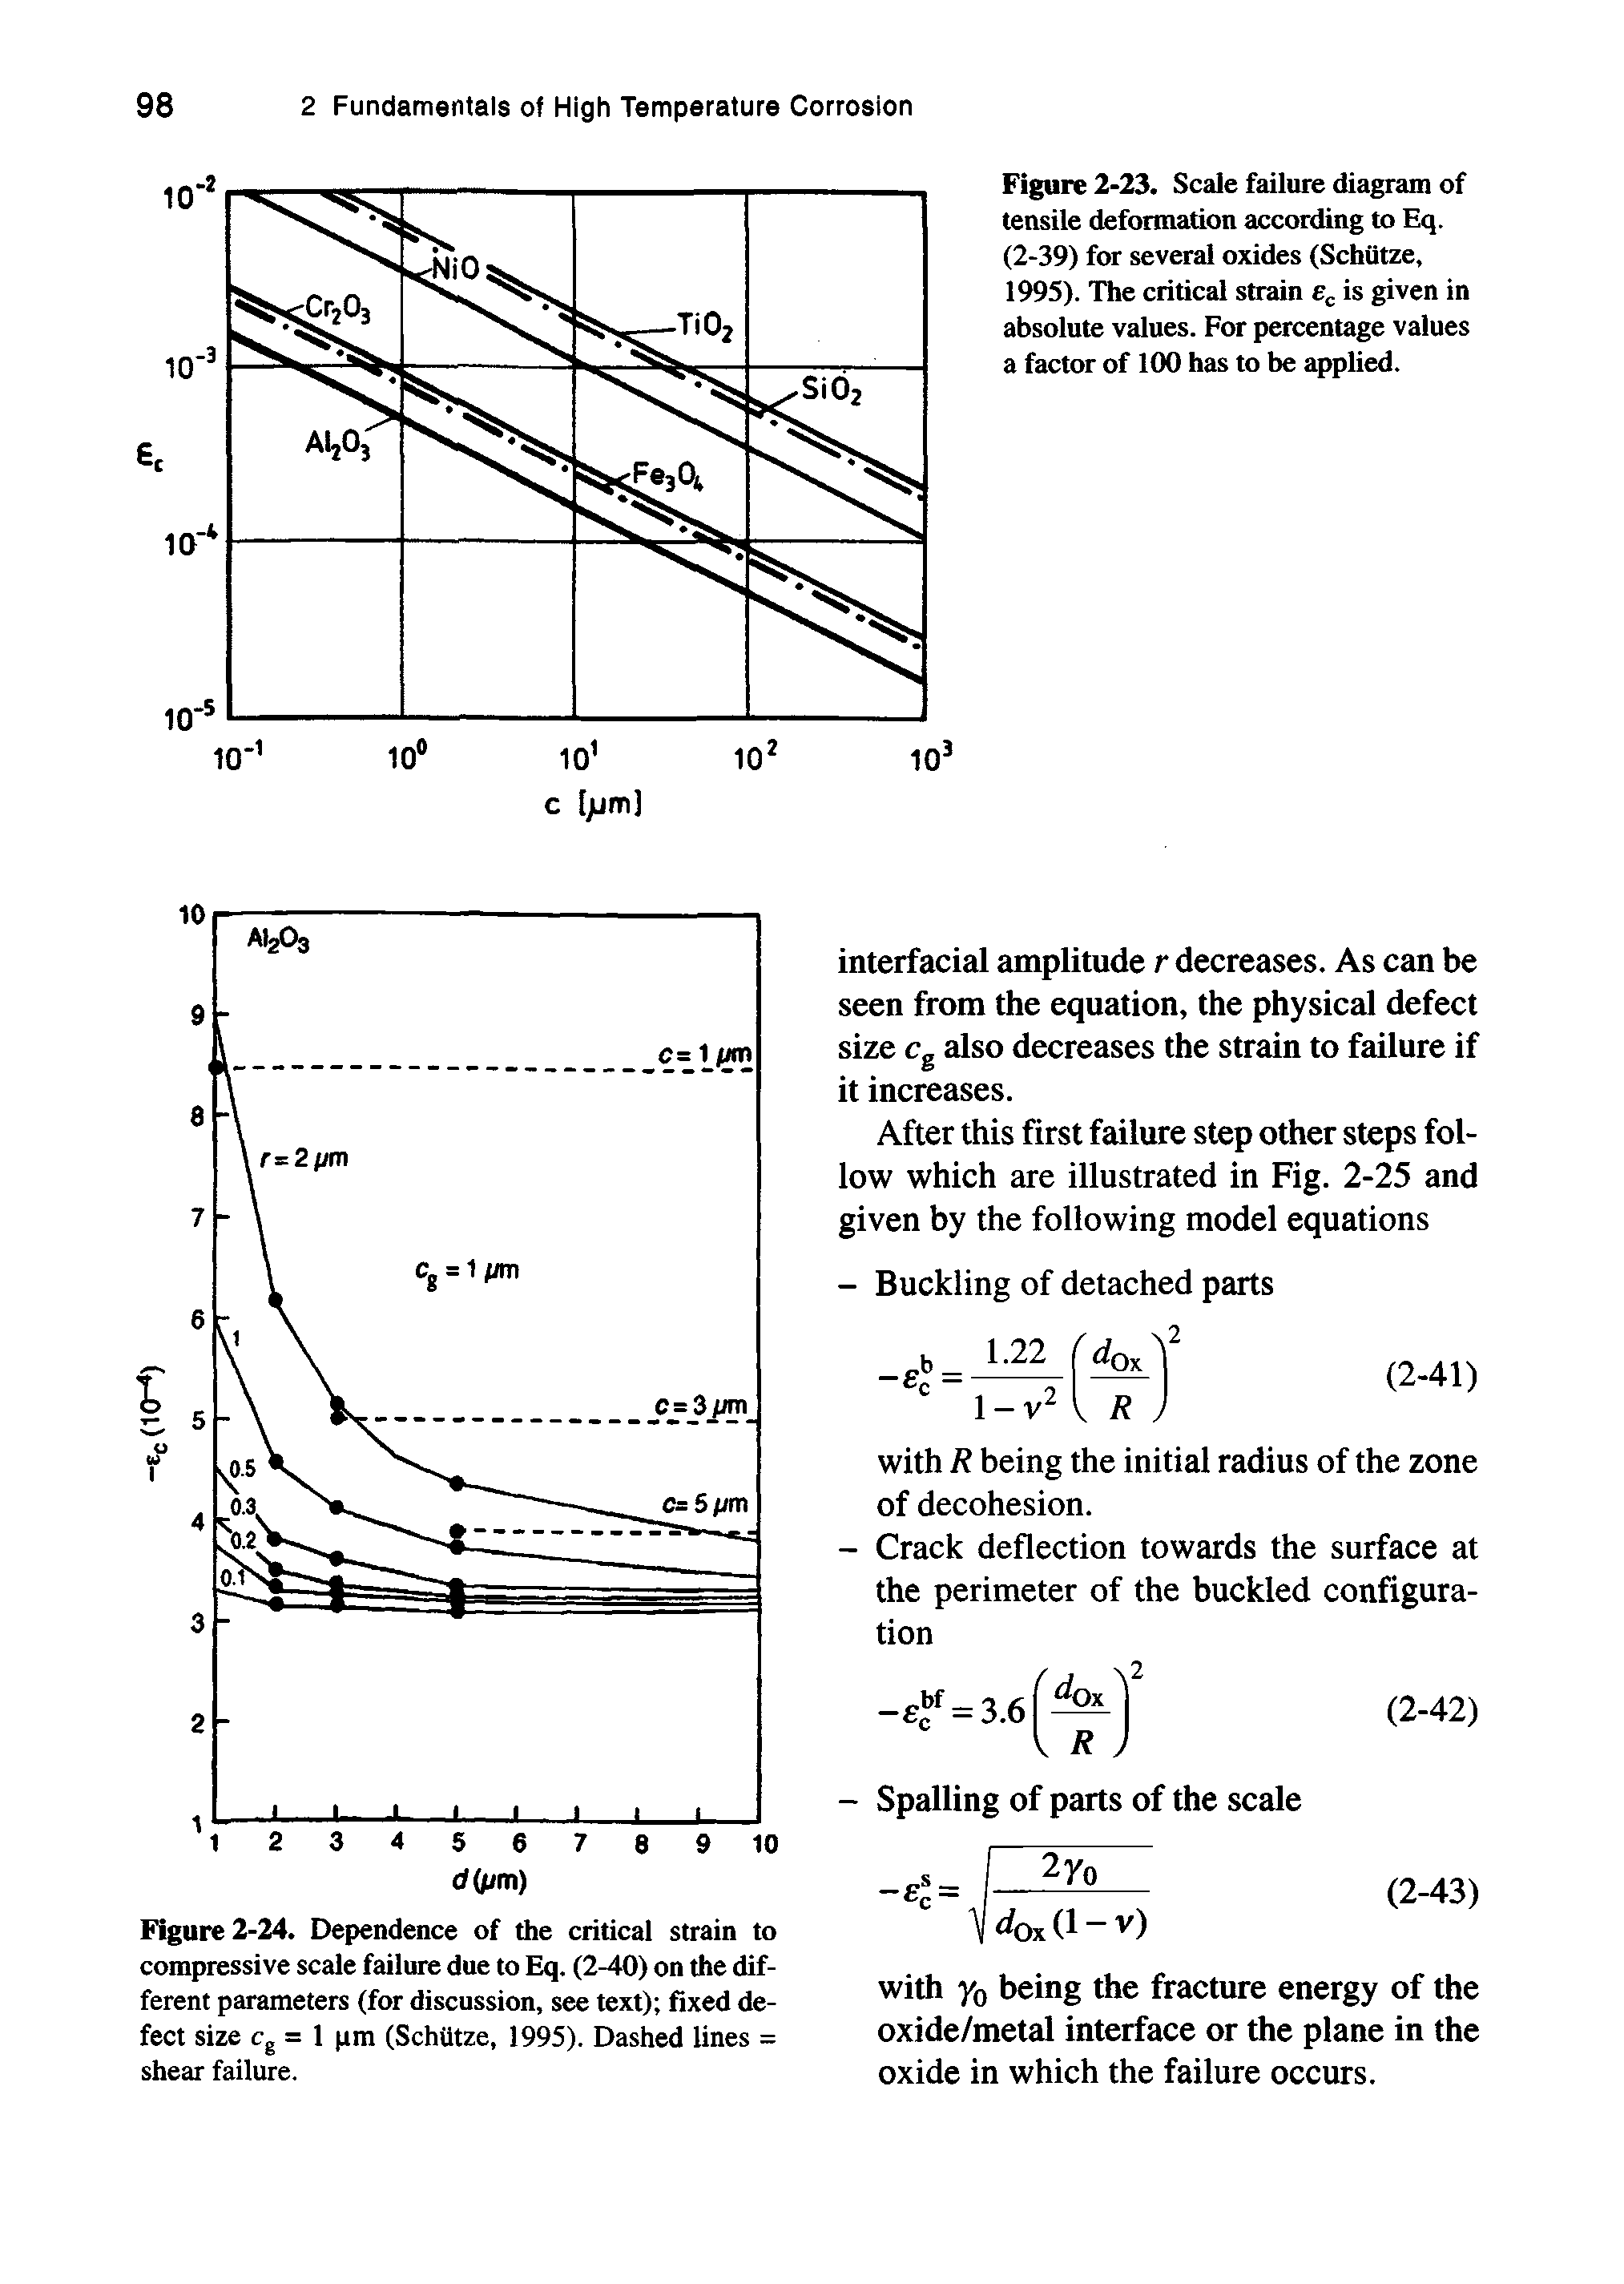 Figure 2-23. Scale failure diagram of tensile deformation according to Eq. (2-39) for several oxides (Schiitze, 1995). The critical strain is given in absolute values. For percentage values a factor of 100 has to be applied.